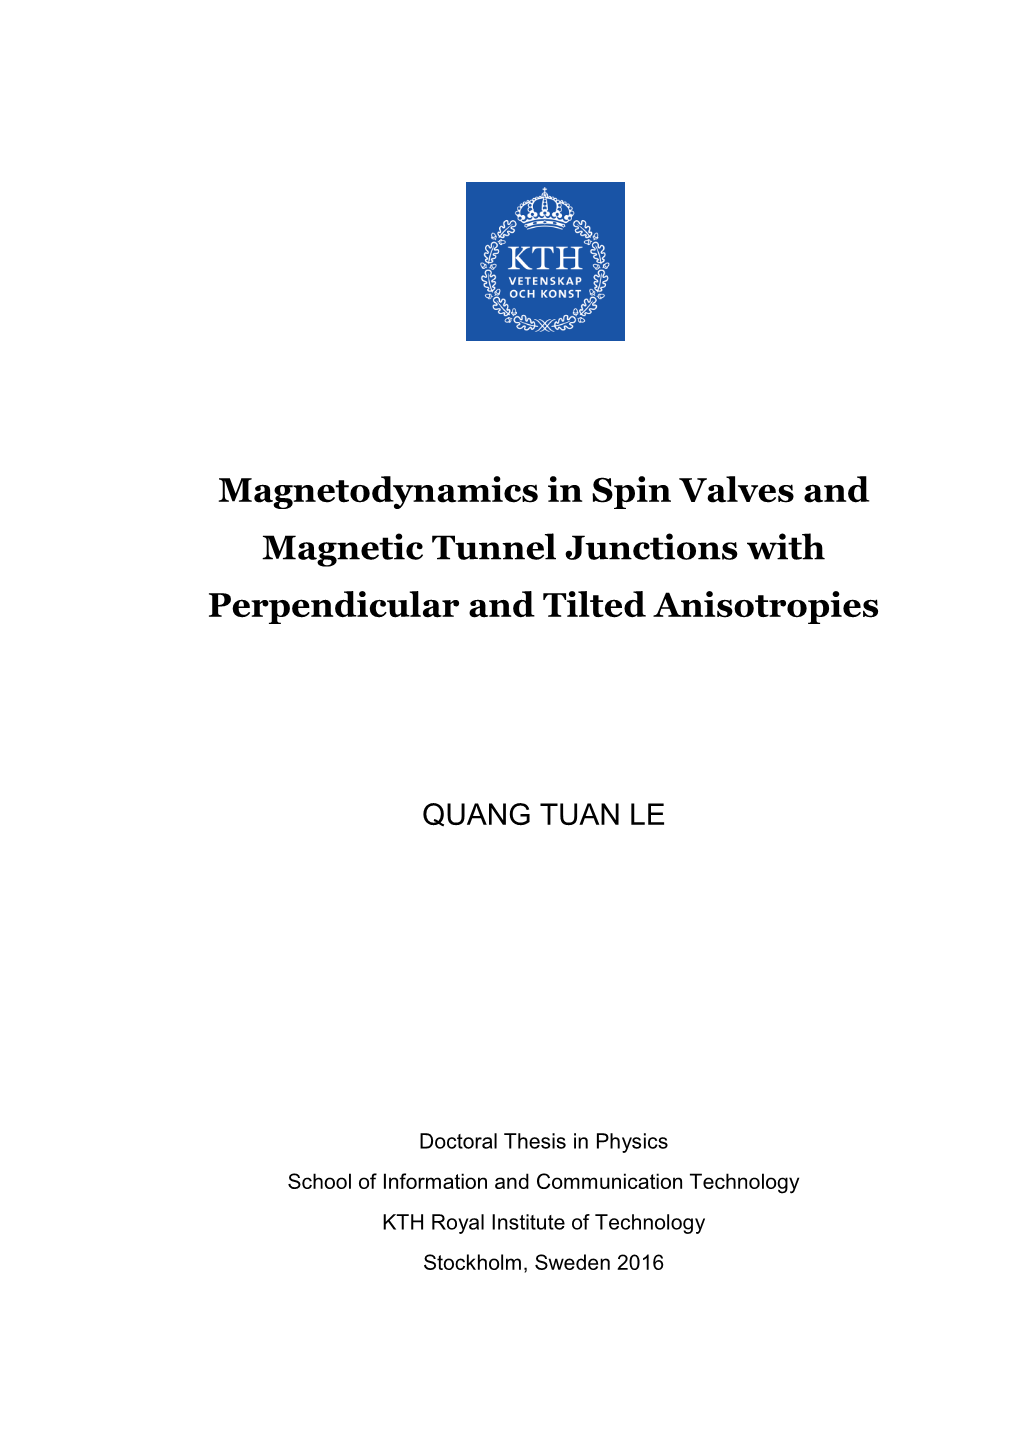 Magnetodynamics in Spin Valves and Magnetic Tunnel Junctions with Perpendicular and Tilted Anisotropies